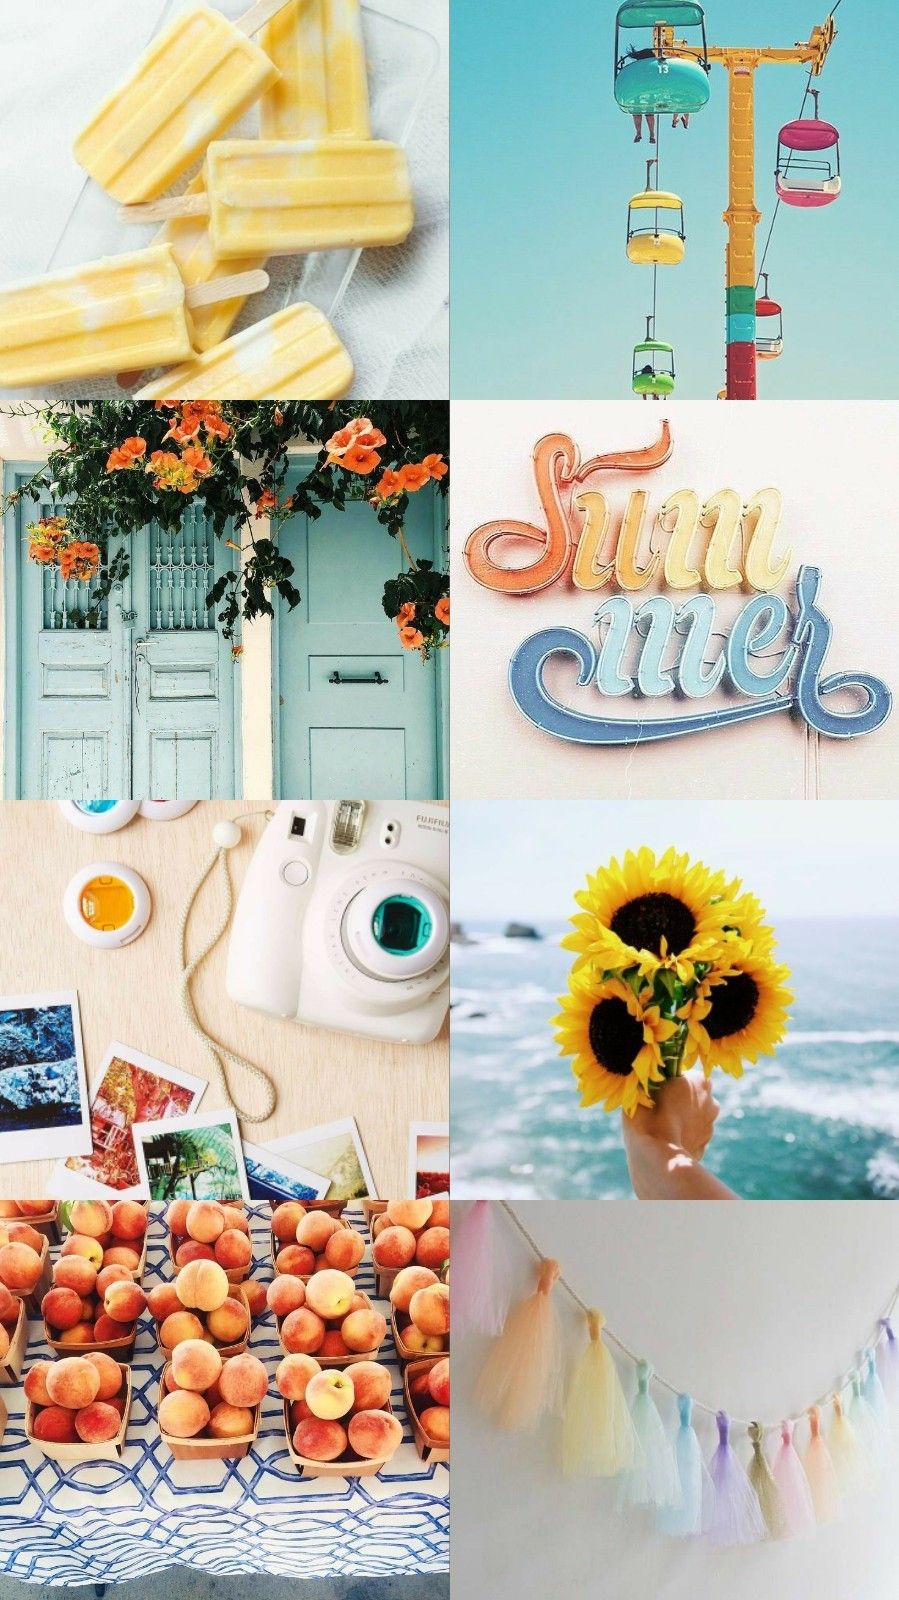 A collage of summer images including ice cream, a beach, and sunflowers.  - Summer